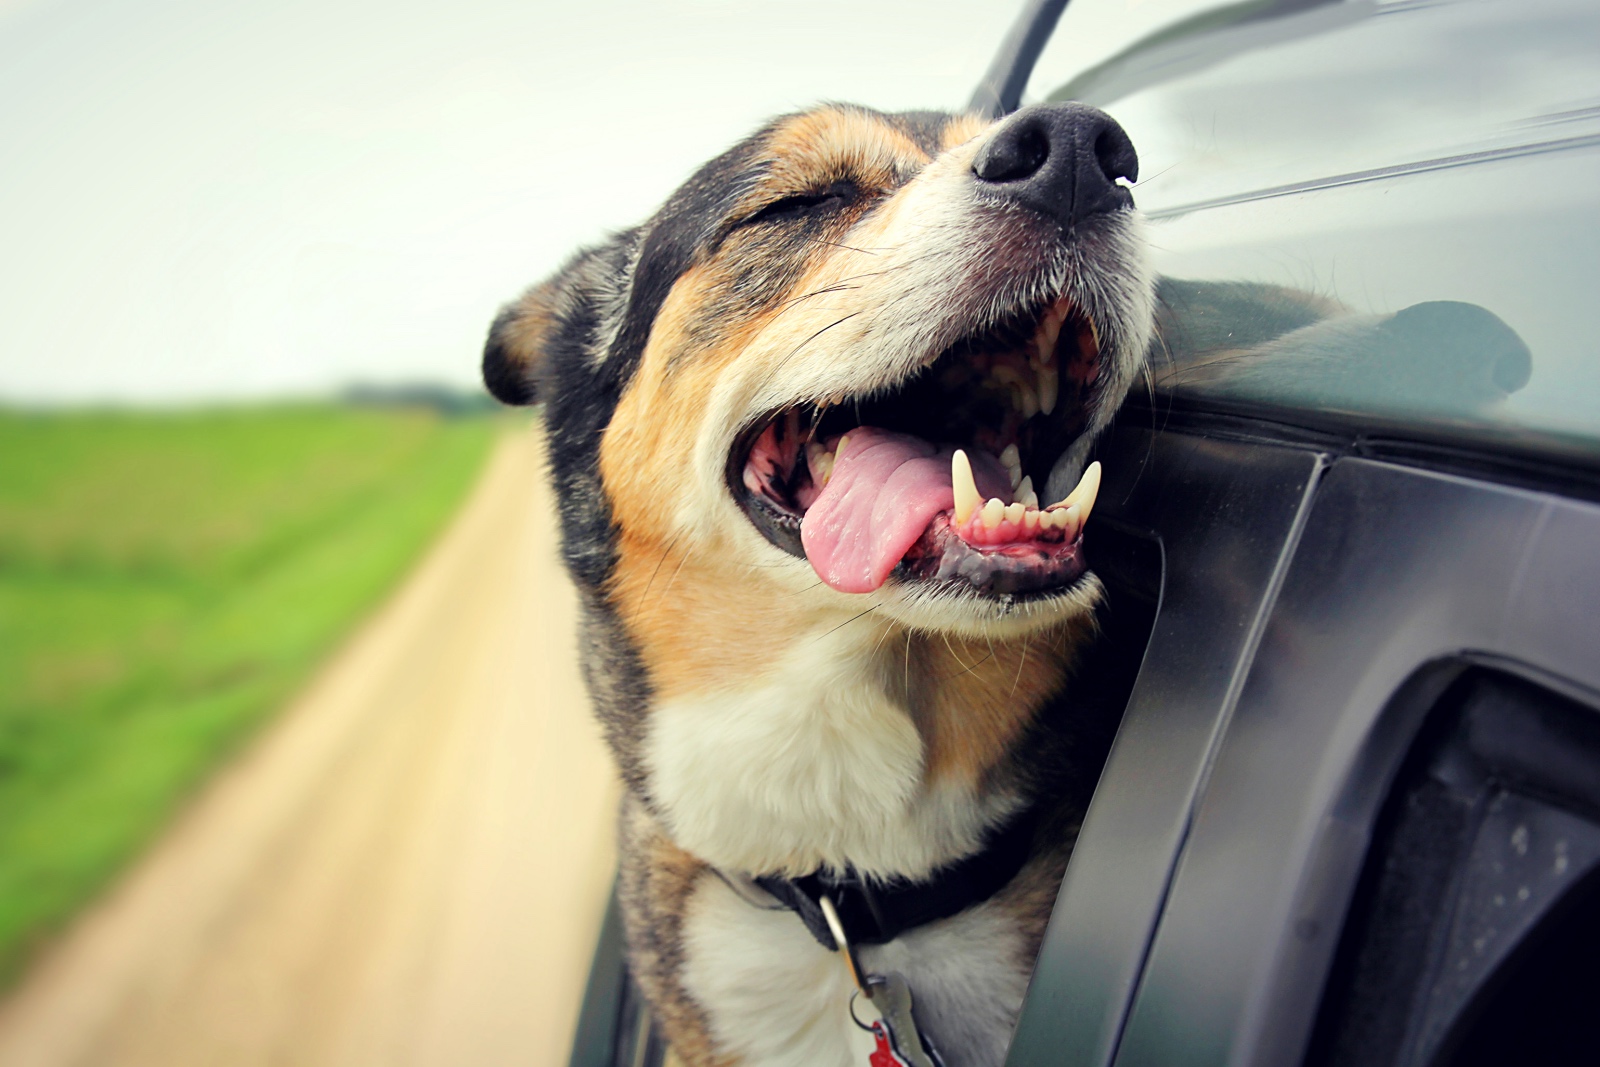 Dog leaning out of car window 'smiling' with tongue hanging out